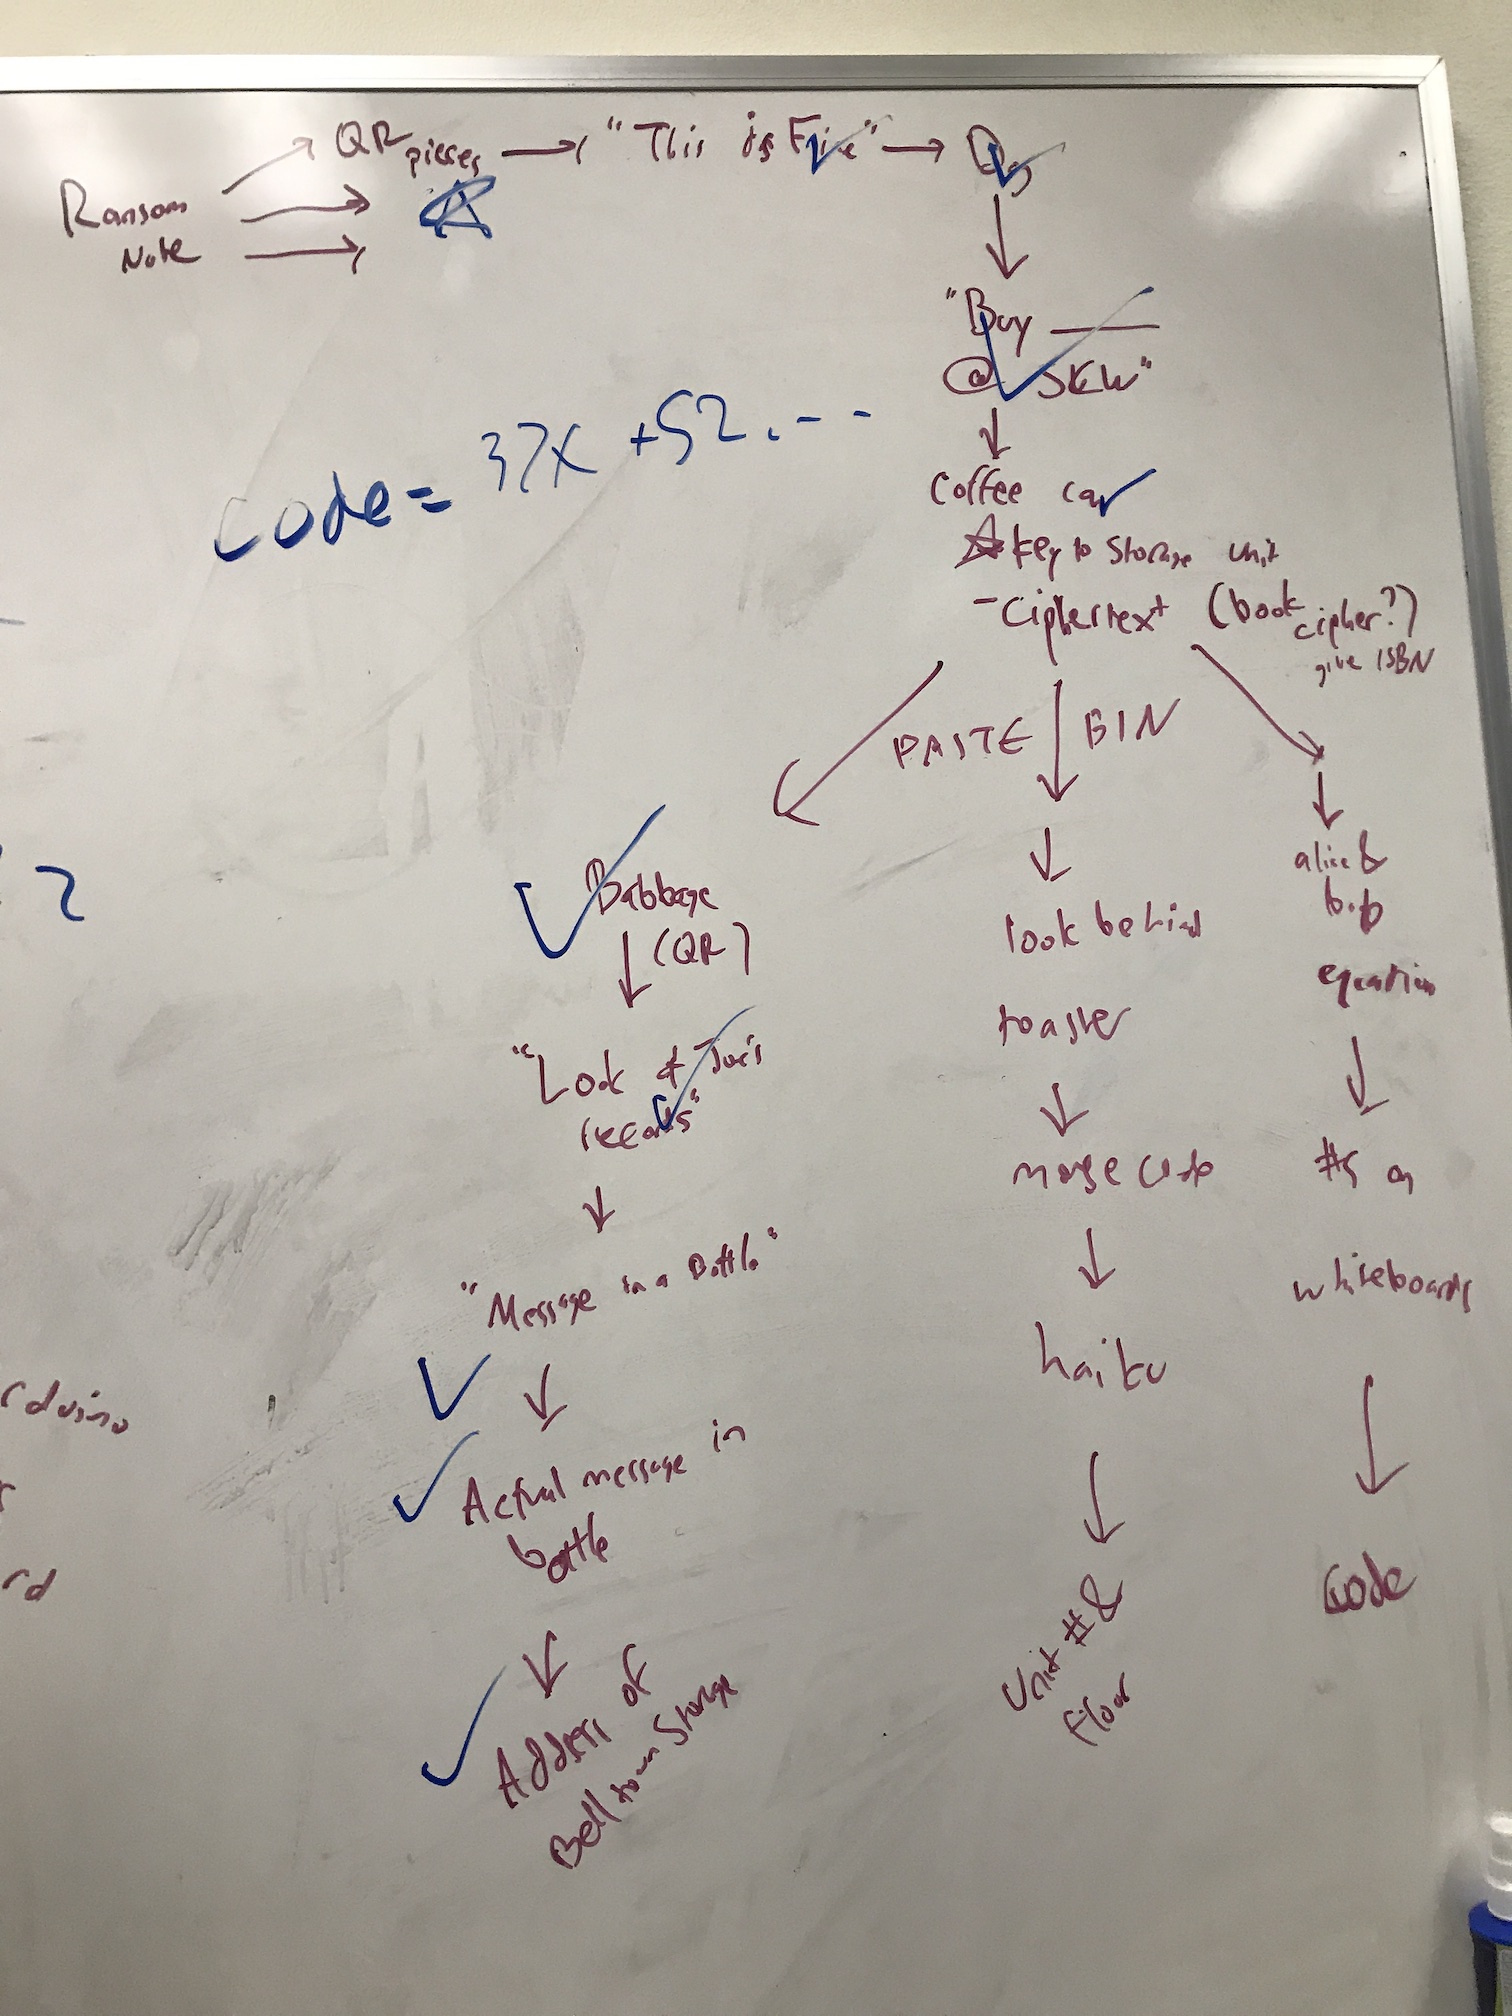 Whiteboard flow chart of puzzle steps.     'Ransom Note' leads to 'This is Fine,' which leads to 'Dog,' which leads to 'Buy blank at SCW,'     which leads to 'coffee can; key to storage unit; ciphertext (book cipher?); give ISBN,'     which leads to 'PASTEBIN,' which then splits into three branches.     First branch: Babbage (QR) leads to 'Look at Joe's records' which leads to 'Message in a Bottle,'     which leads to 'Actual message in bottle,' which leads to 'Address of Belltown Storage.'     Second branch: 'look behind toaster' leads to 'Morse code' which leads to 'haiku'     which leads to 'Unit # & floor'     Third branch: 'alice & bob' leads to 'equation' which leads to 'numbers on whiteboards'     which leads to 'code'